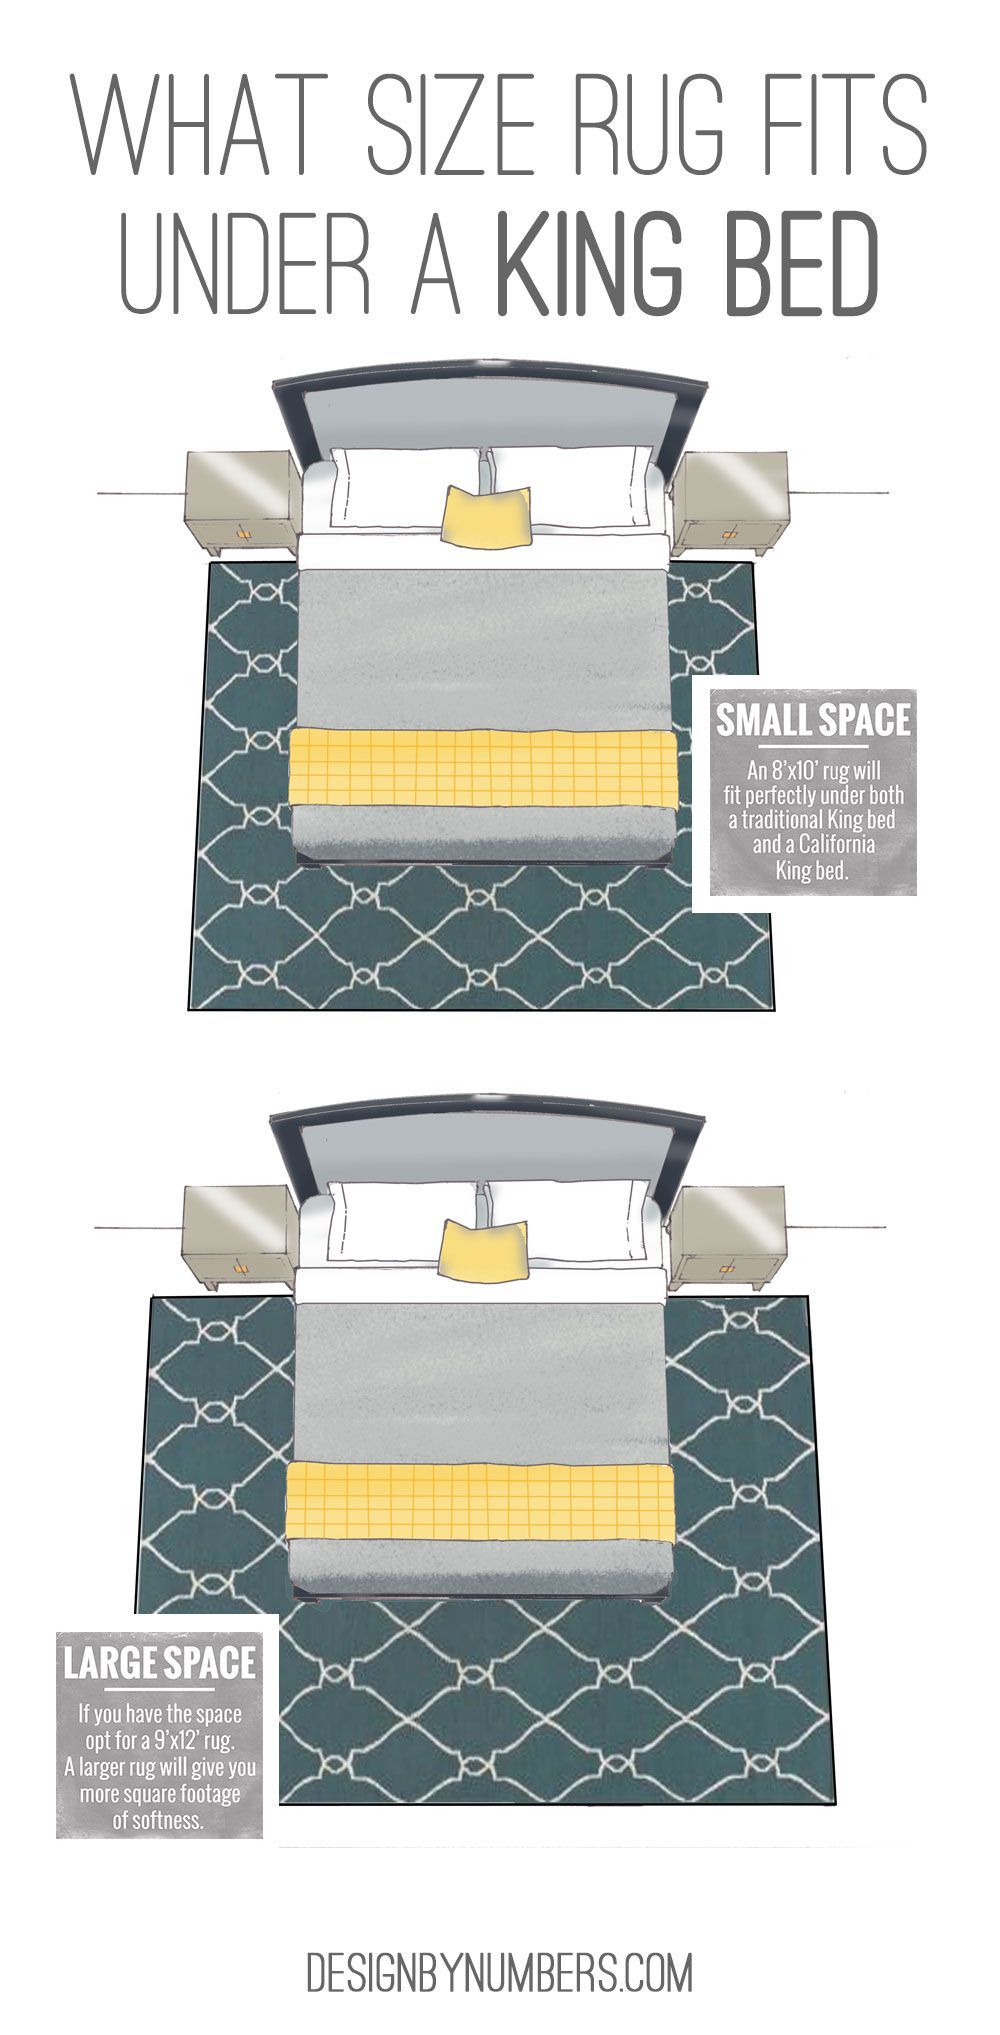 what size rug fits under a king bed | Design by